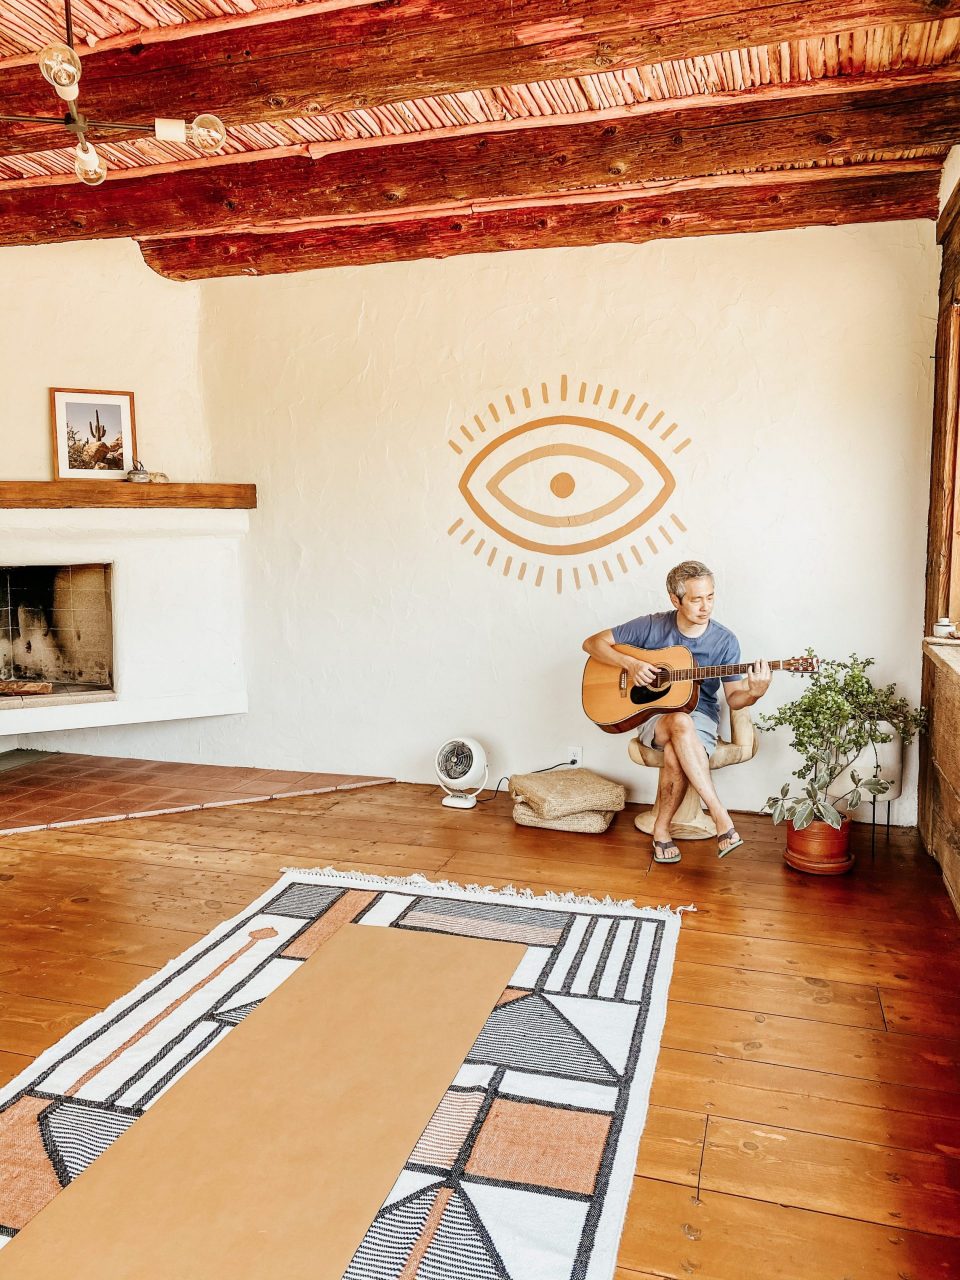 Travis playing guitar in an open yoga room beneath a minimalist mural of an eye